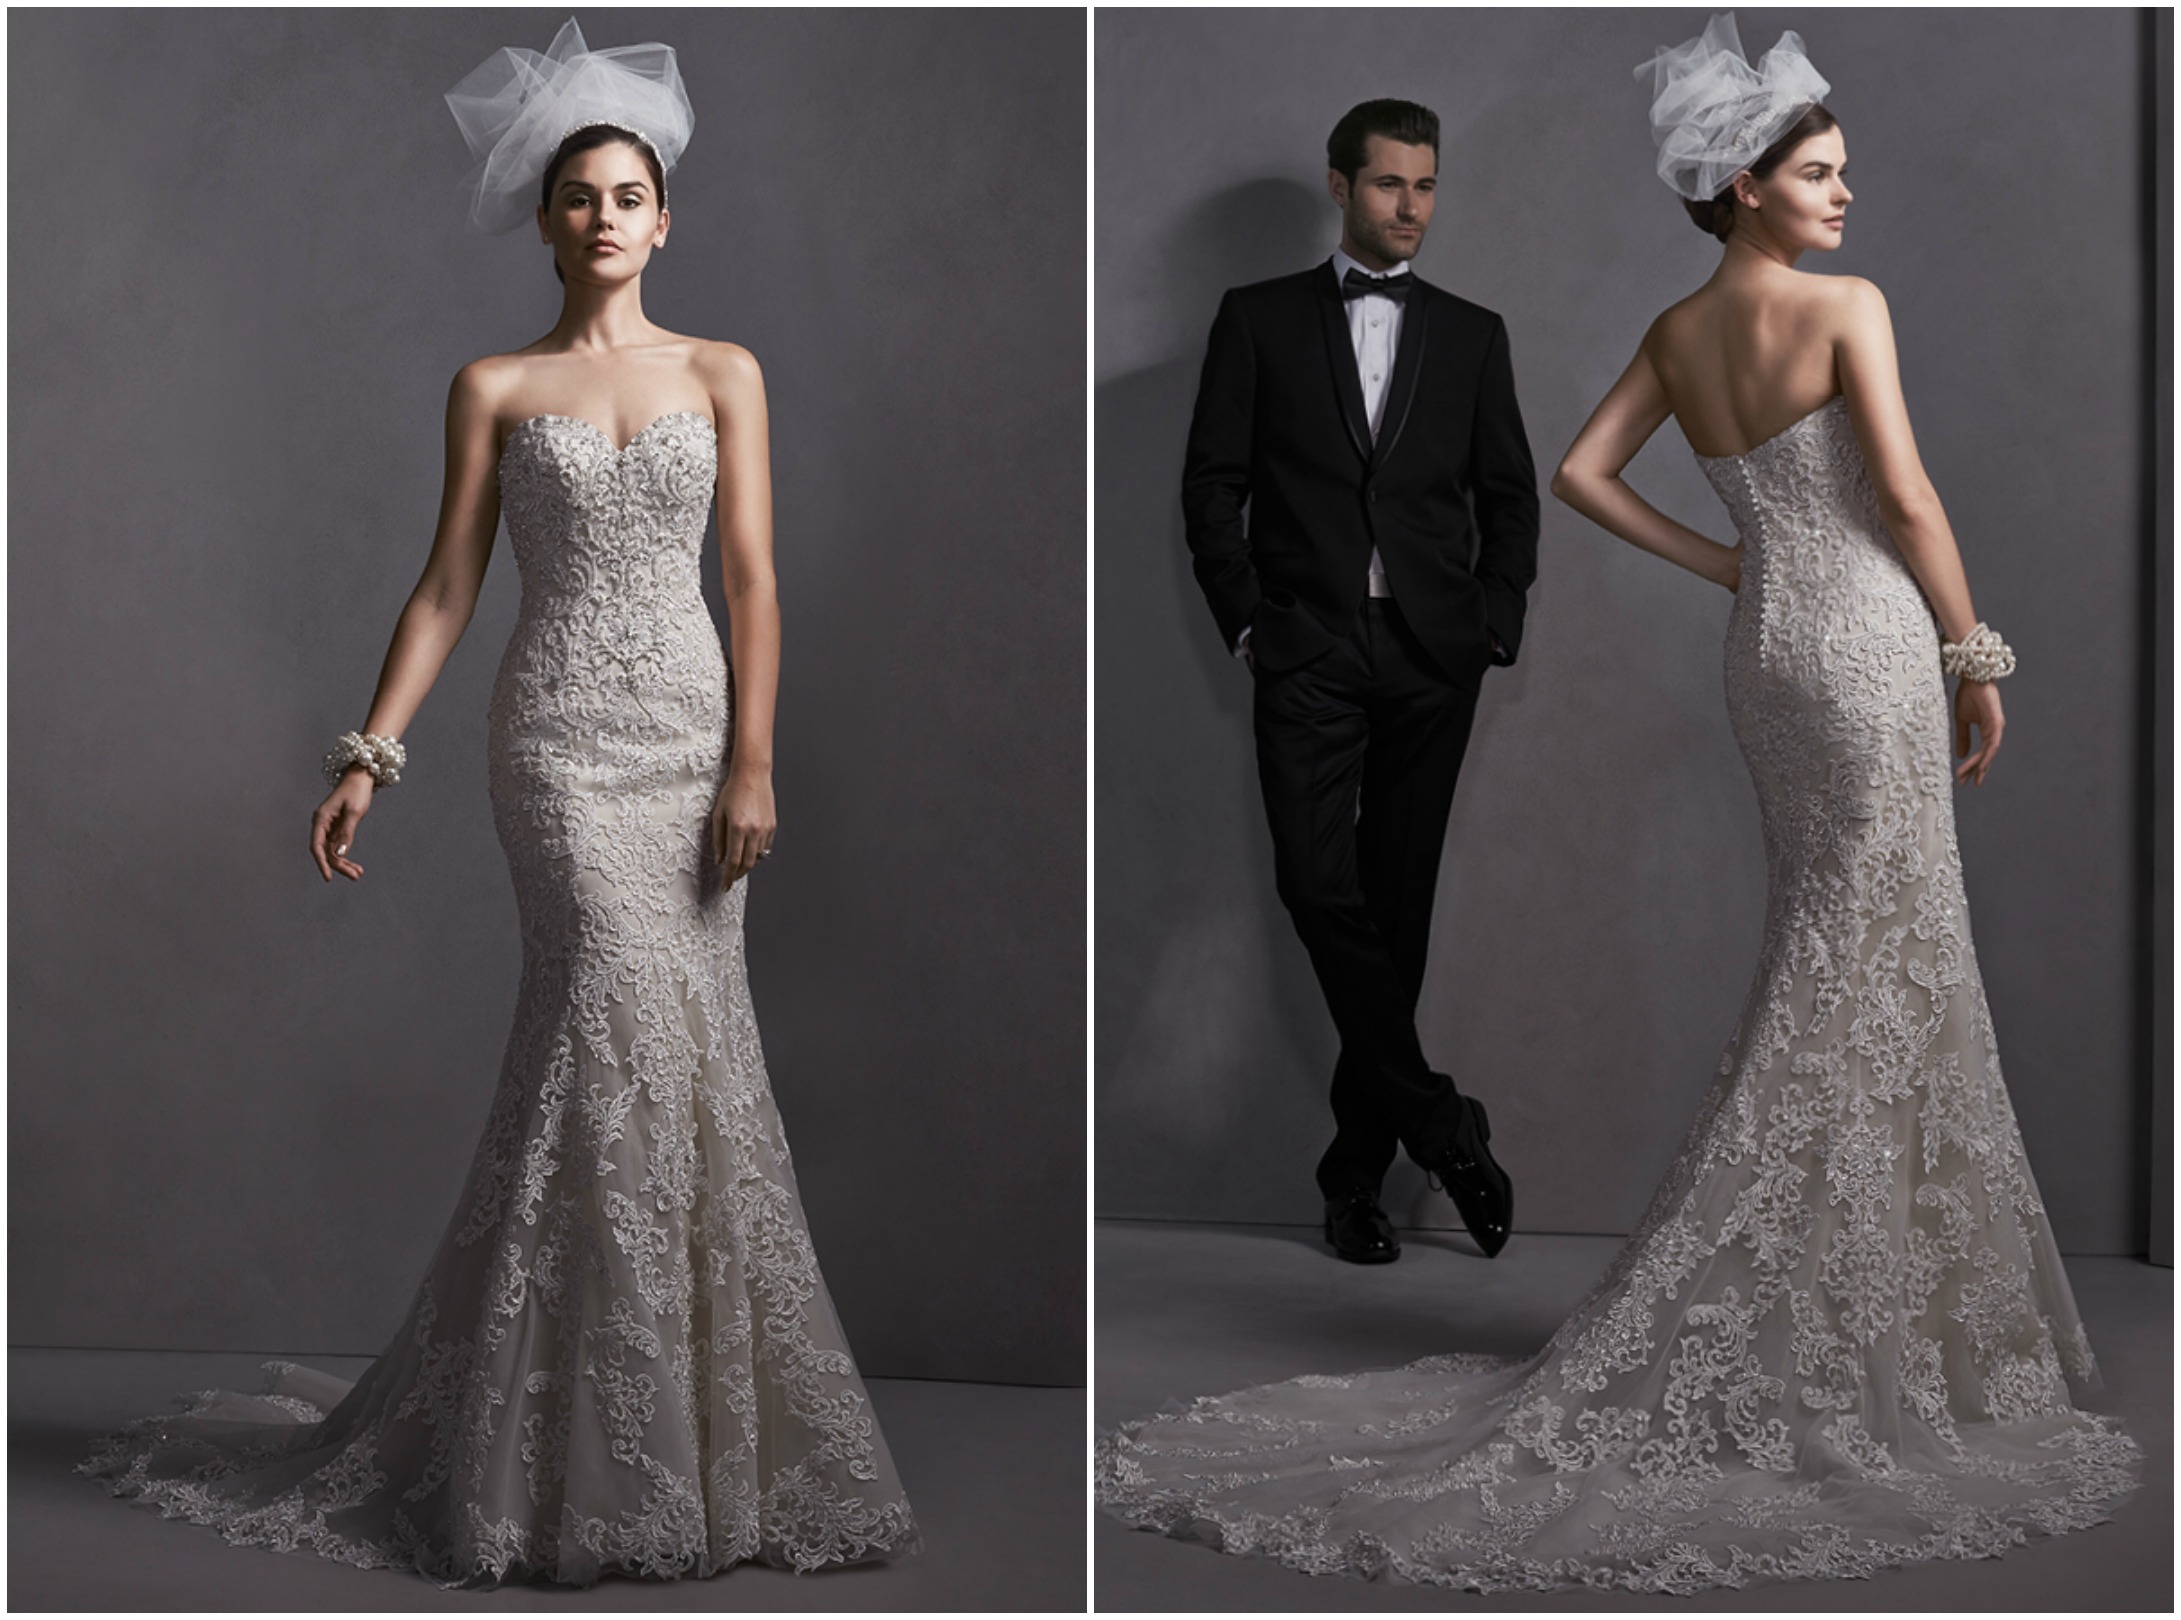 <a href="http://www.sotteroandmidgley.com/dress.aspx?style=5SS114LU&amp;page=0&amp;pageSize=36&amp;keywordText=&amp;keywordType=All" target="_blank">Sottero and Midgley 2016</a>